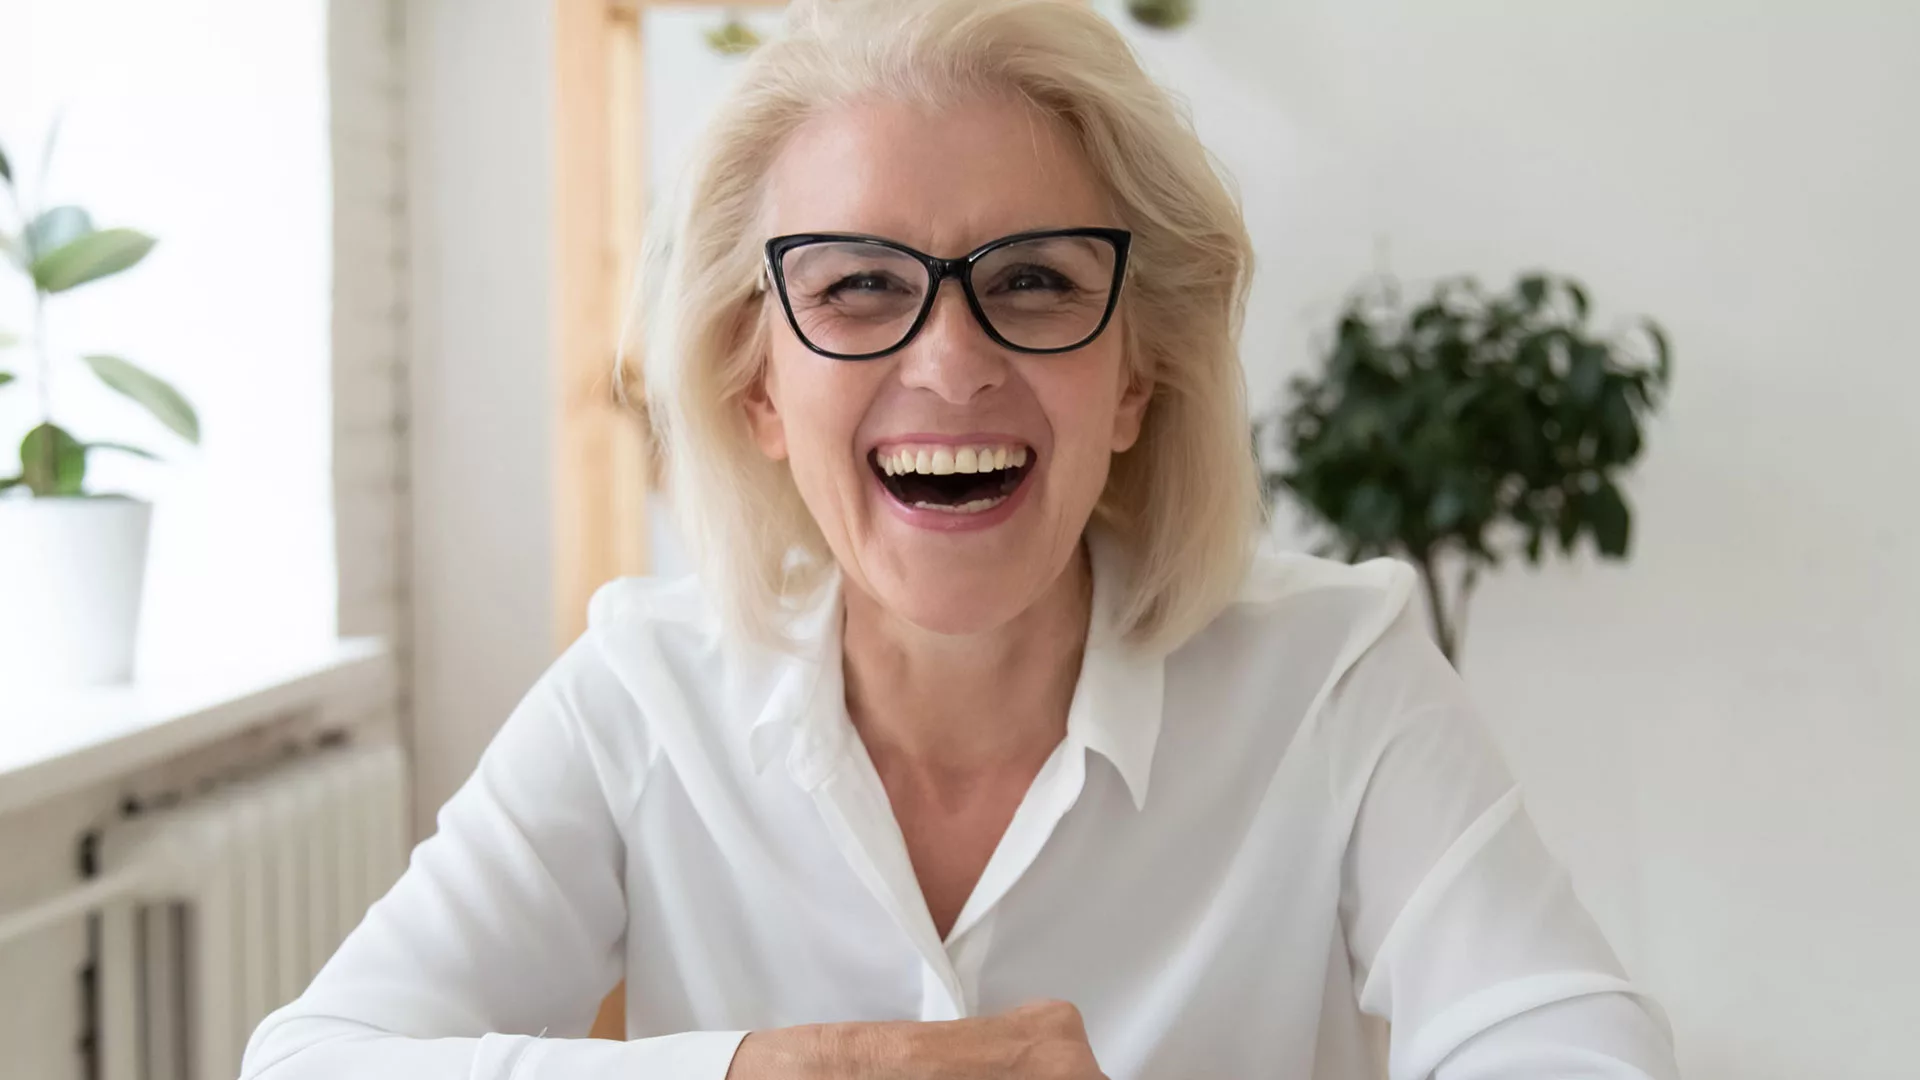 Happy woman with glasses smiling